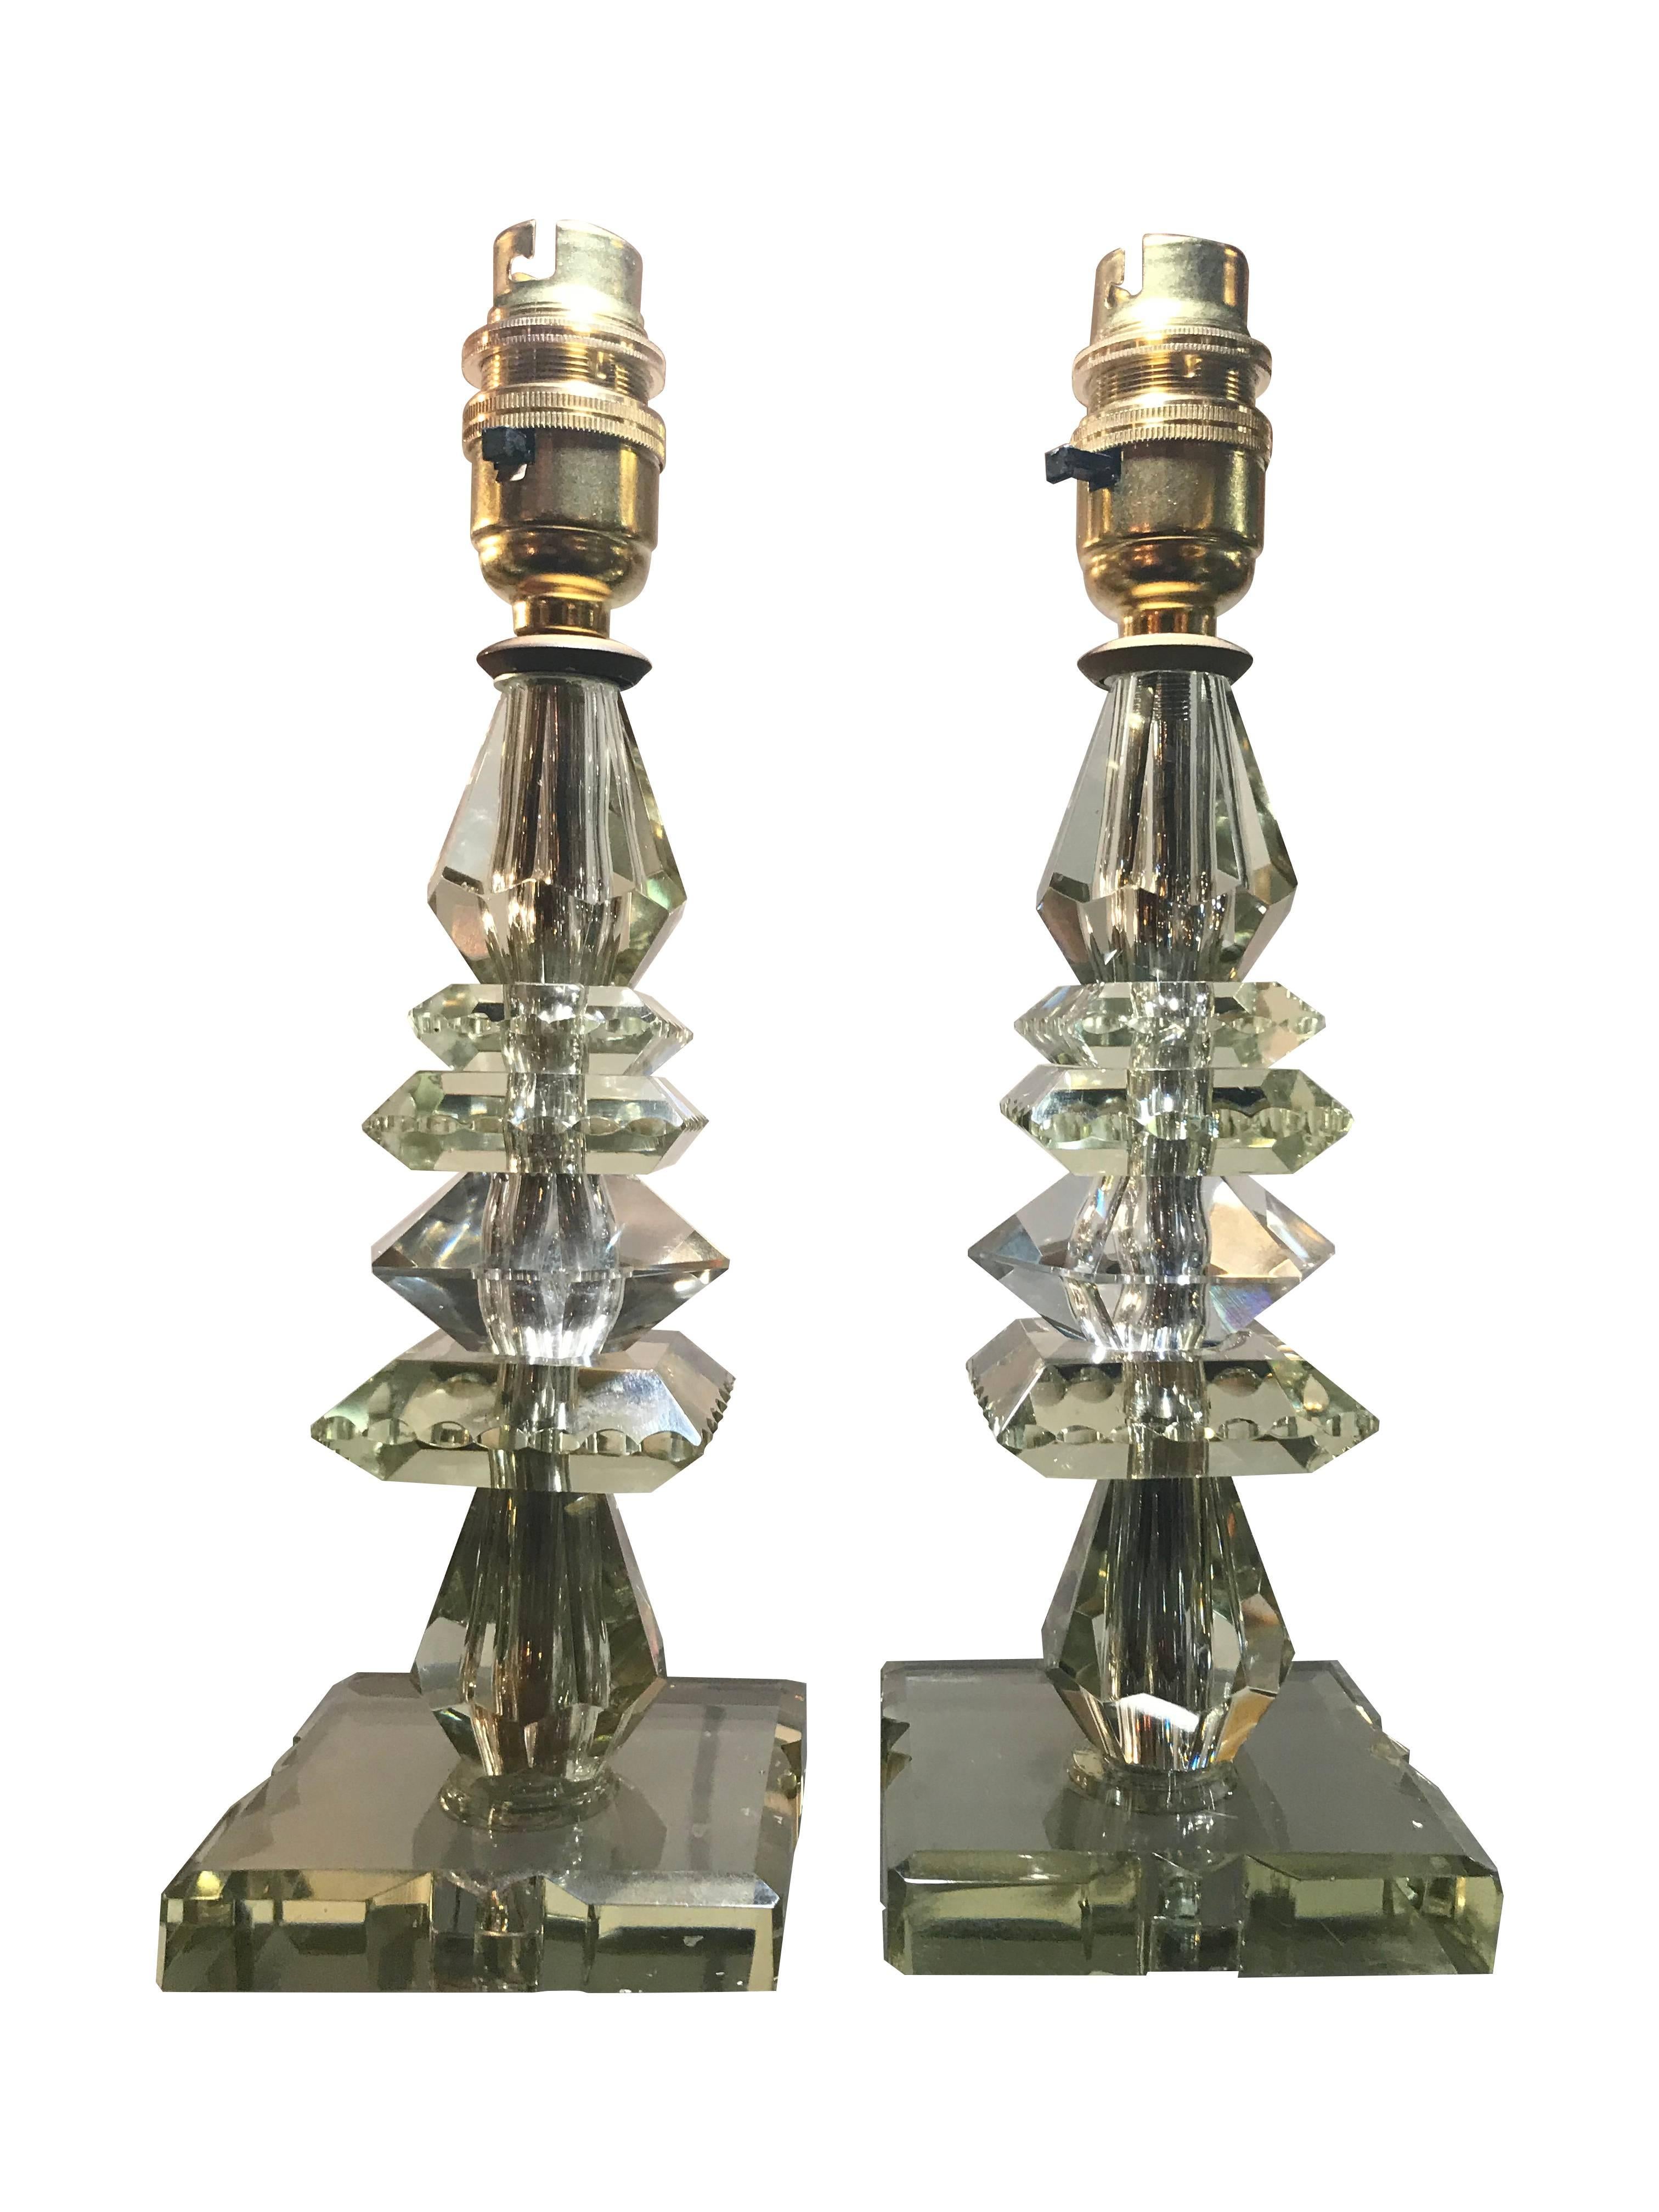 A pair of 1930s French green crystal glass lamps with brass fittings, re-wired and pat tested with antique silver cord flex.